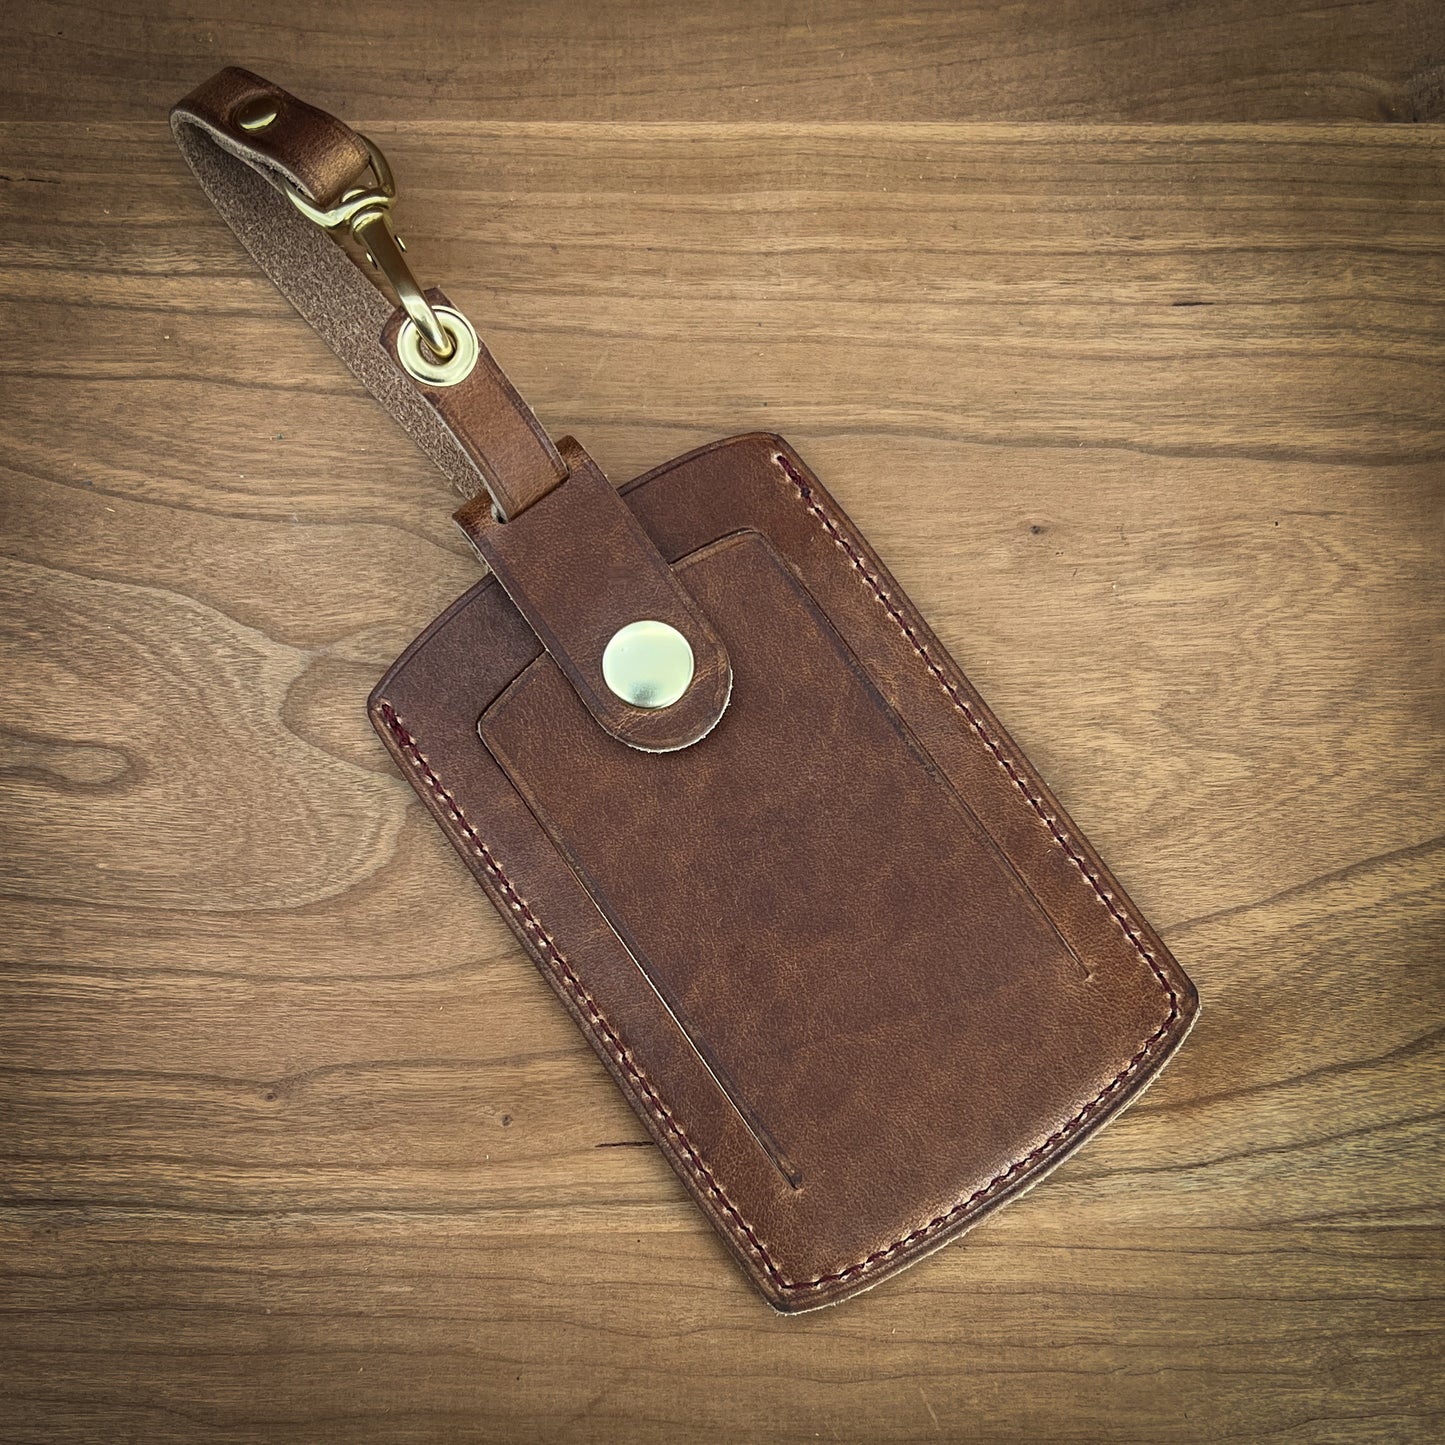 Business Traveller Luggage Tag in Horween Leather | Handmade to Order